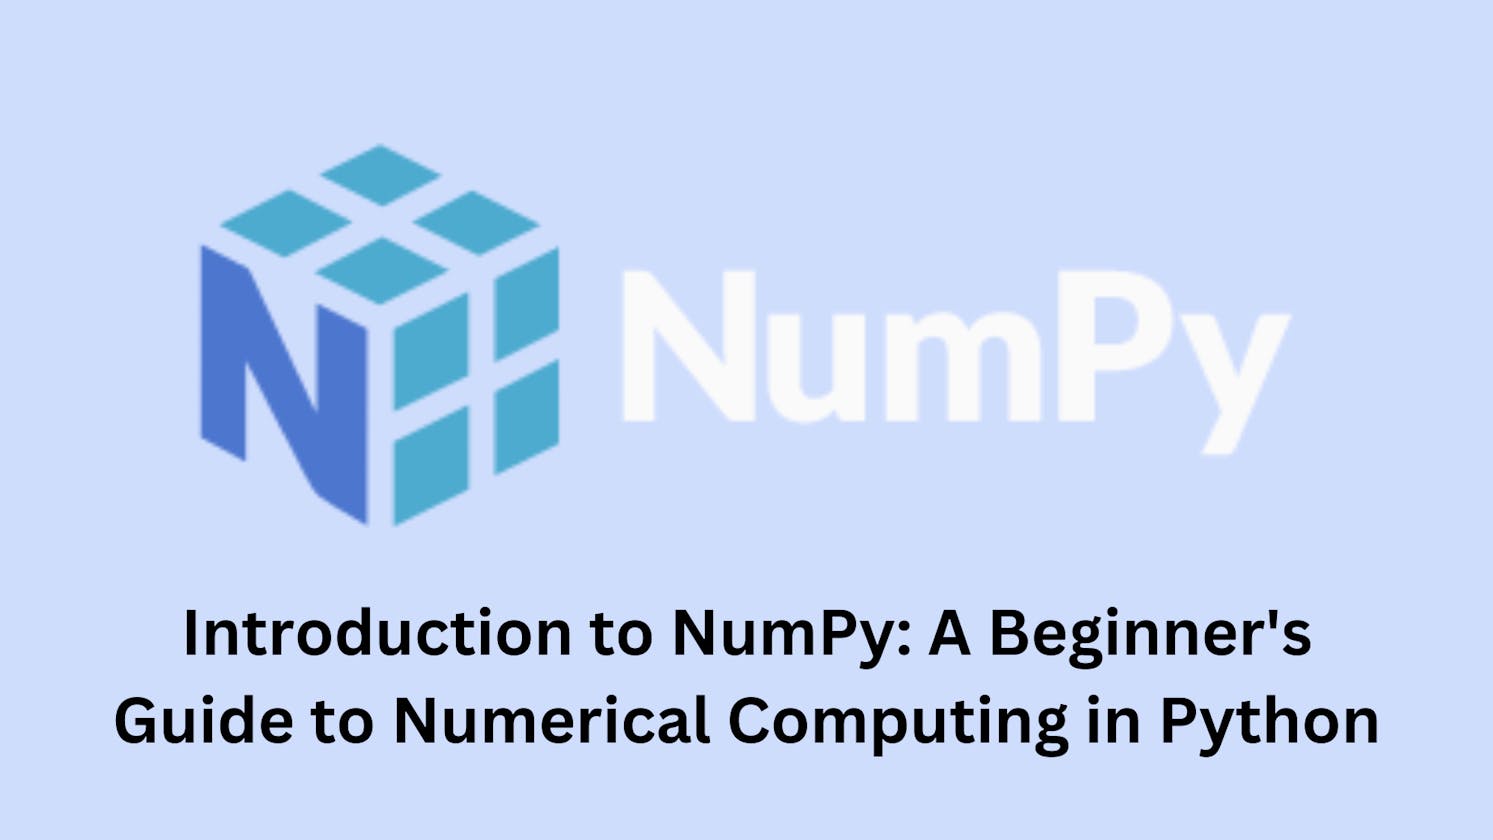 Introduction to NumPy: A Beginner's Guide to Numerical Computing in Python